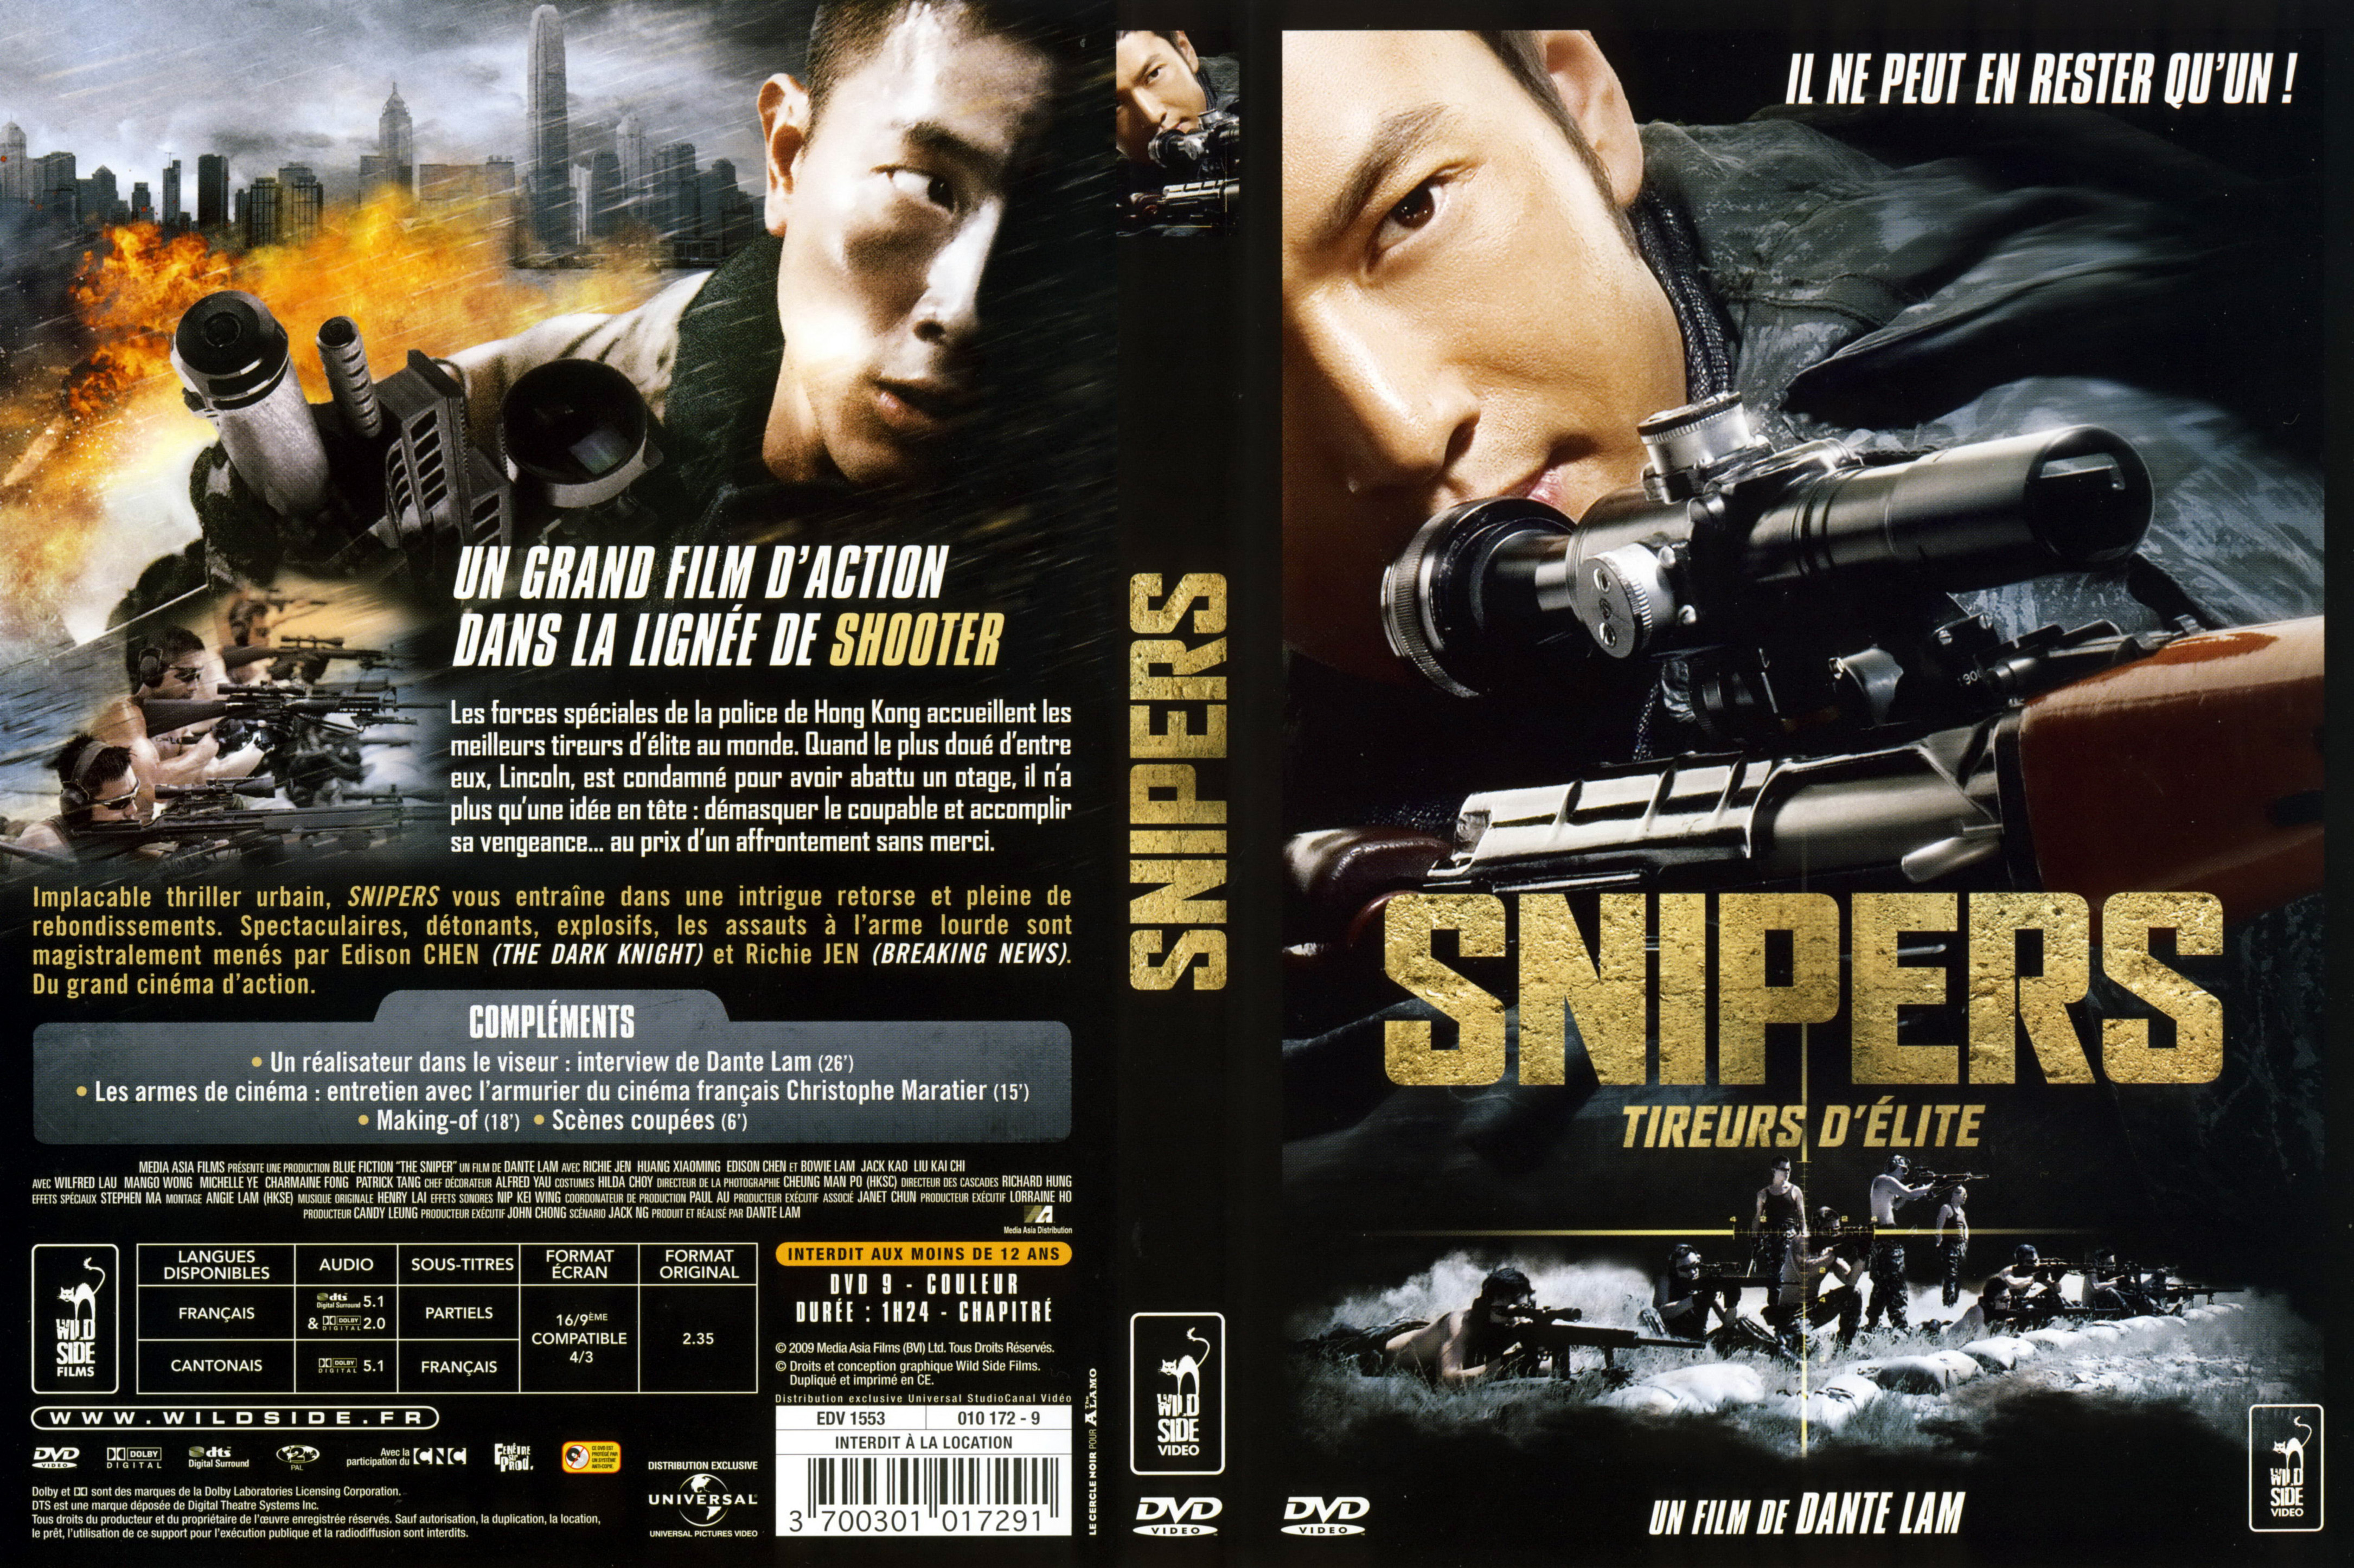 Jaquette DVD Snipers tireurs d